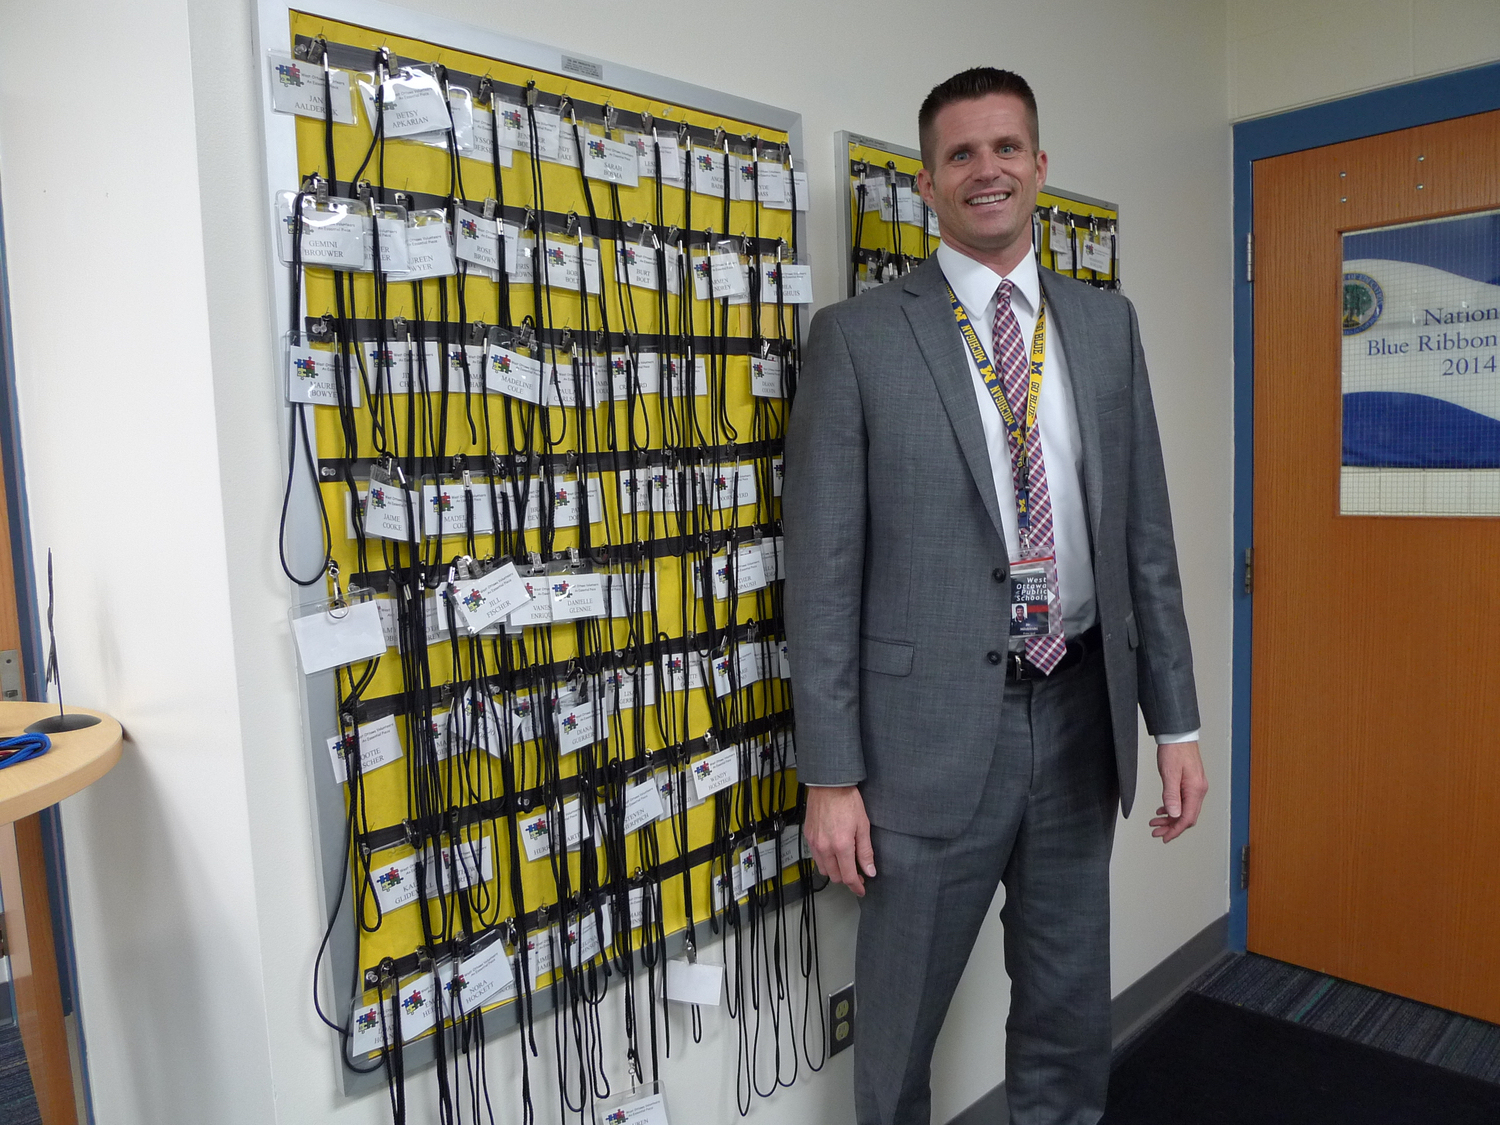 Jens Milobinski, principal at Lakeshore Elementary, stands in front of the dozens of lanyards worn by the parent volunteers he recruits to read one-on-one with students during the school day. (Bridge photo by Nancy Derringer)